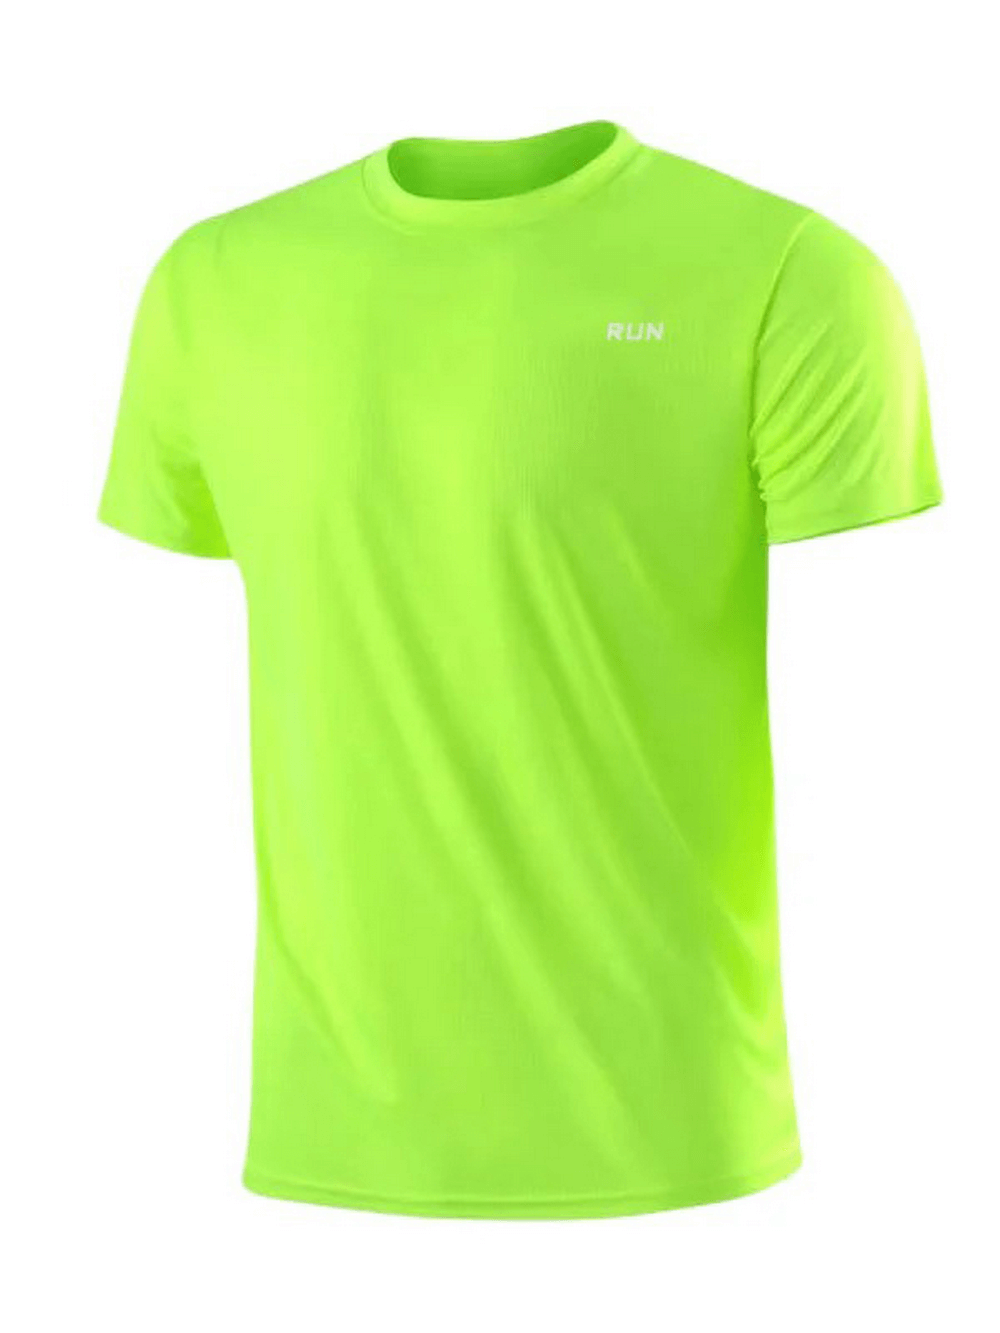 Men's Quick-Drying Round Neck T-Shirt for Training - SF2156